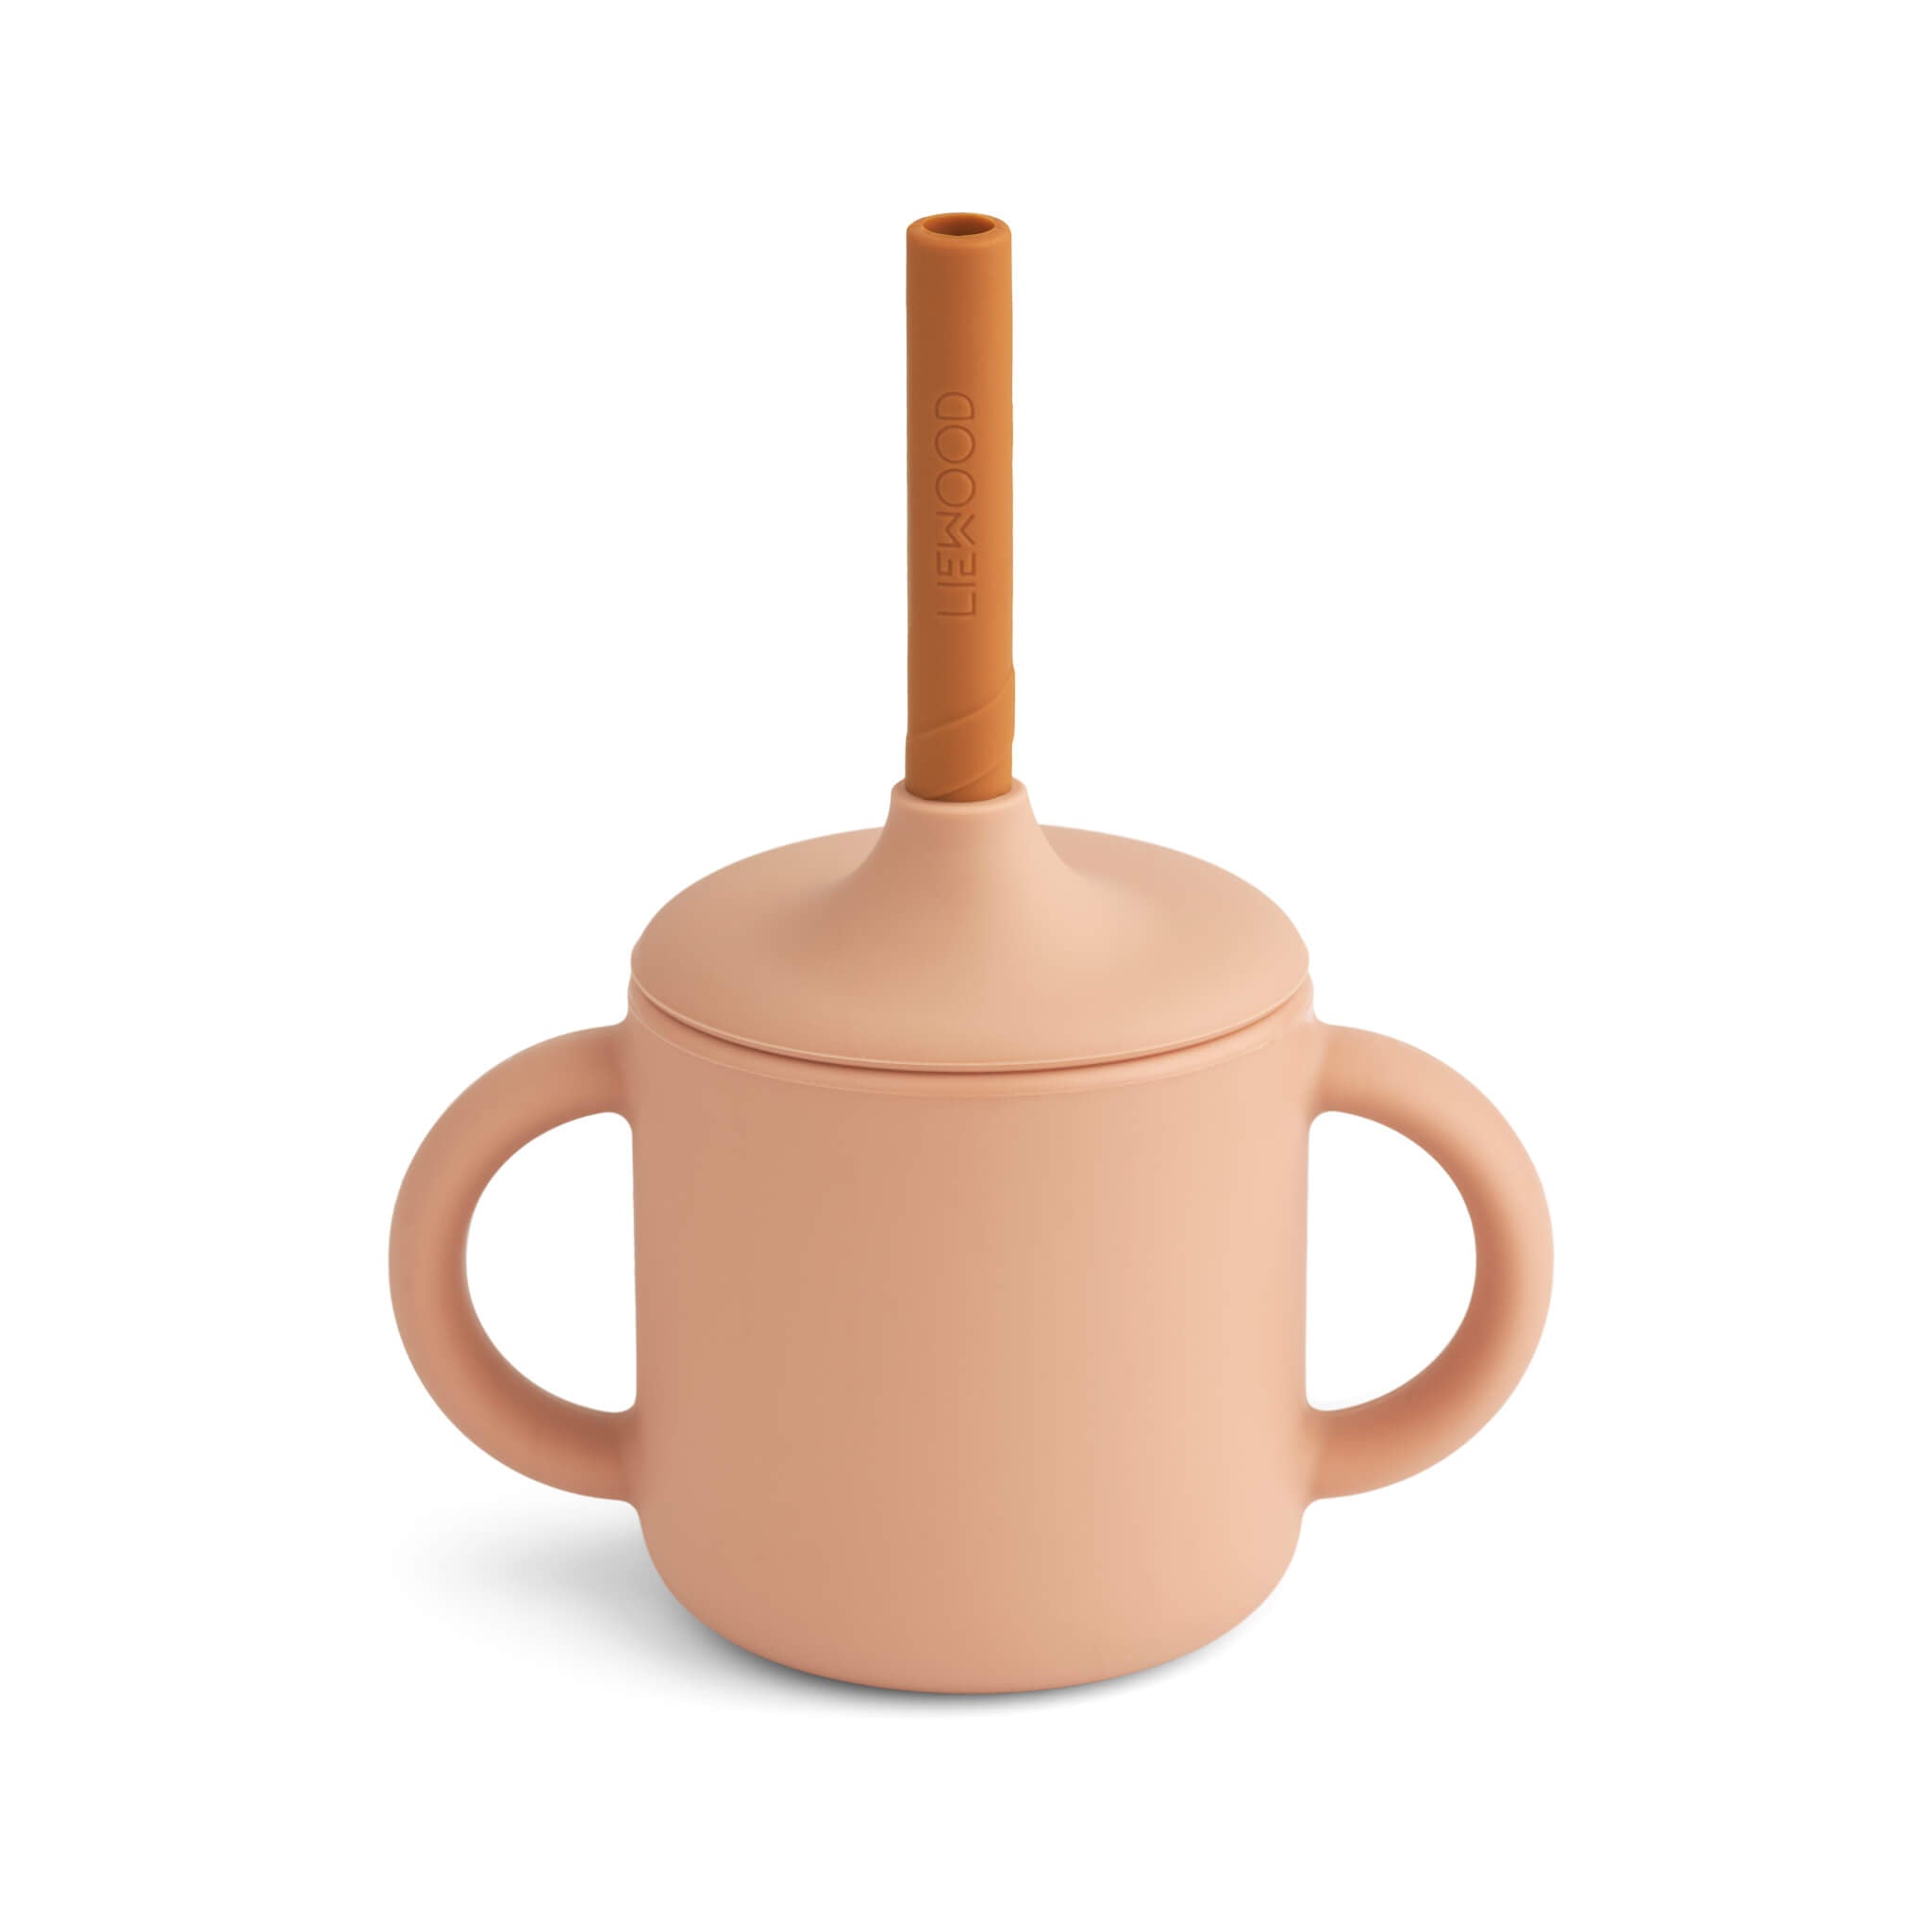 Cameron Sippy Cup - Mustard/Tuscany Rose